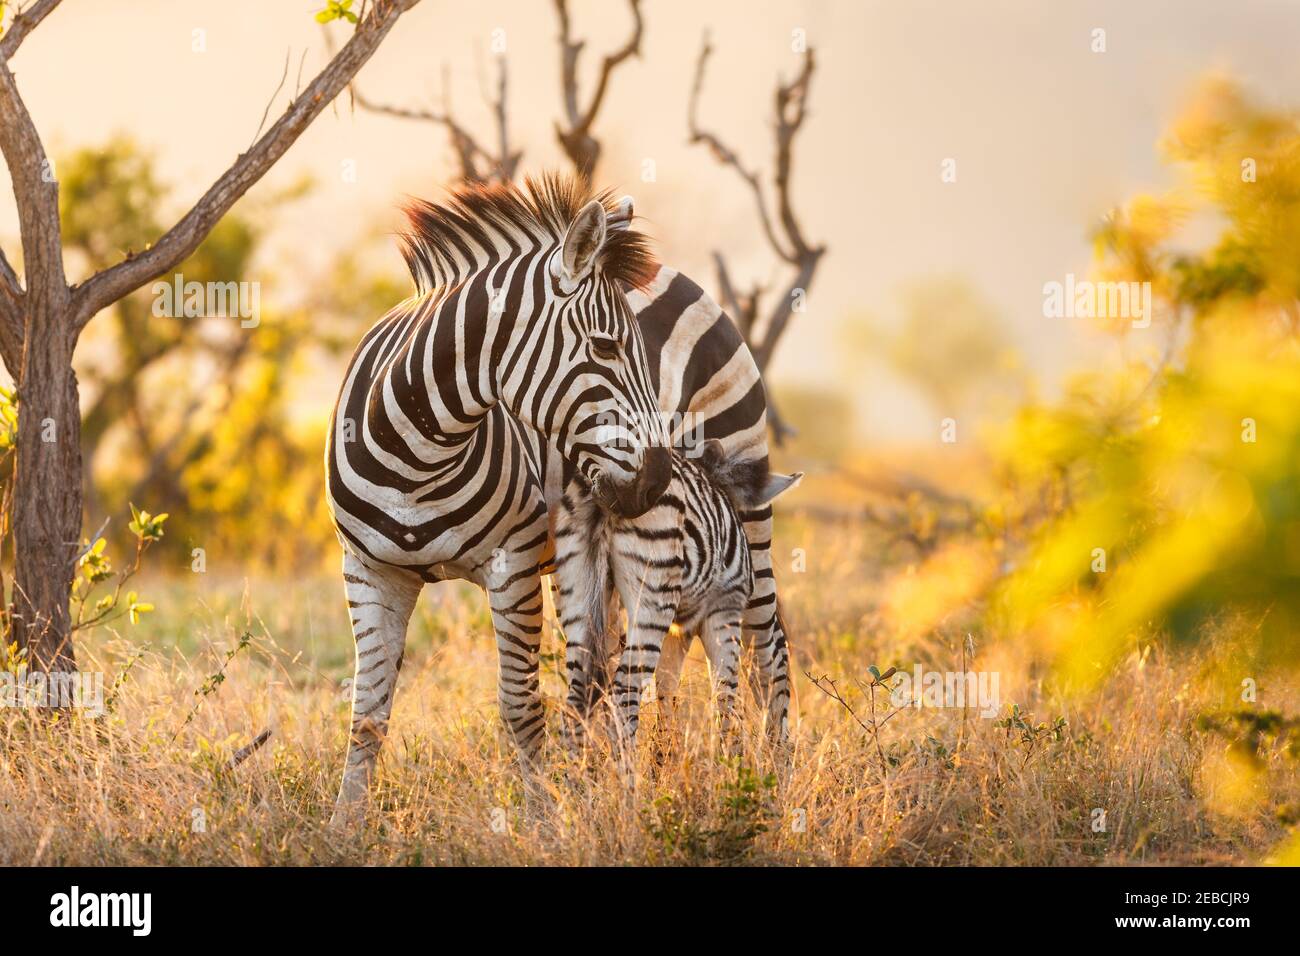 Burchell's Zebra, Equus burchelli, mother and suckling baby, Berg-en-Dal Area, Malelane District, Kruger National Park, South Africa Stock Photo